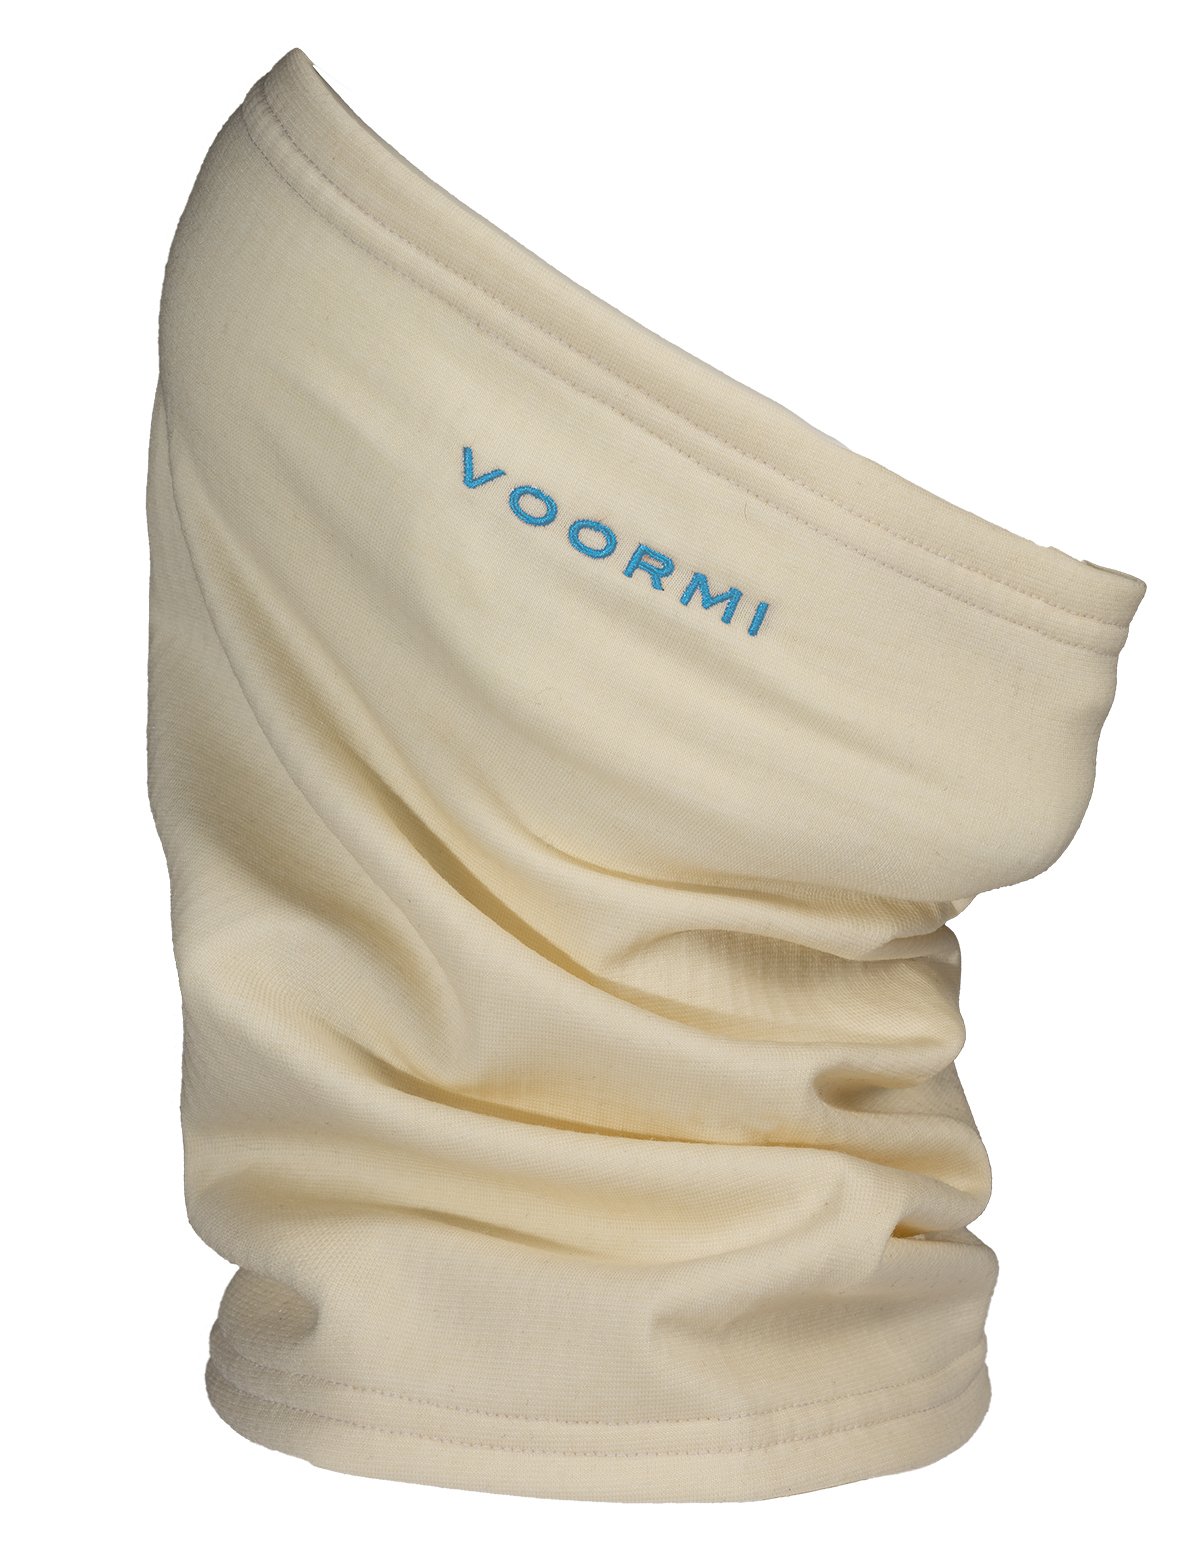 PRECISION BLENDED GAITER (COTTON) by VOORMI